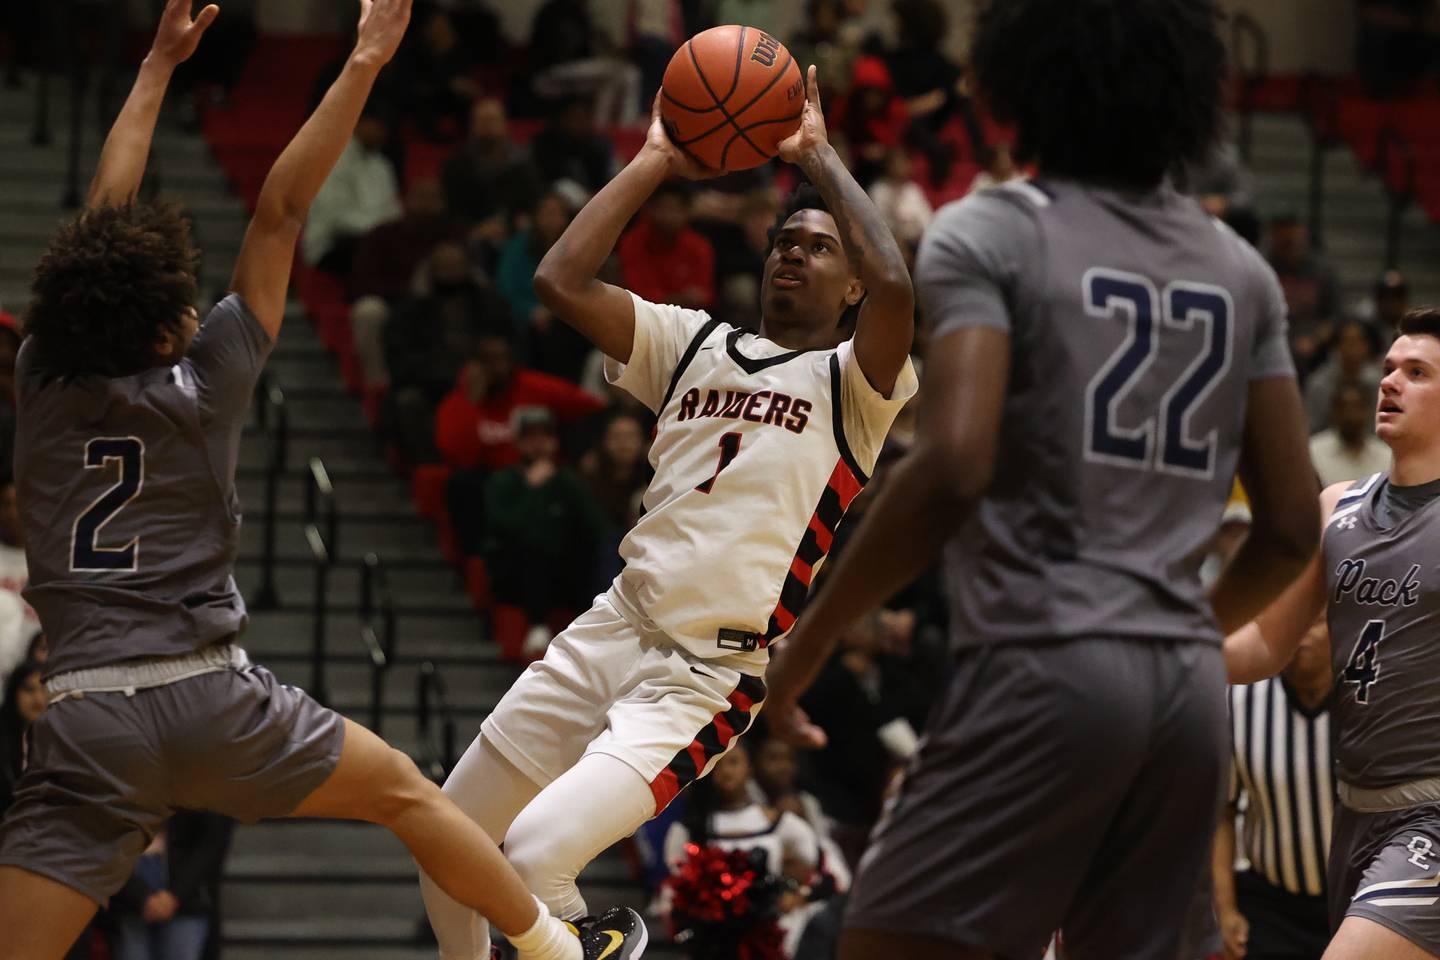 Bolingbrook’s Mekhi Cooper hits the fadeaway shot against Oswego East in the Class 4A Bolingbrook Sectional semifinal on Wednesday, March 1st 2023.